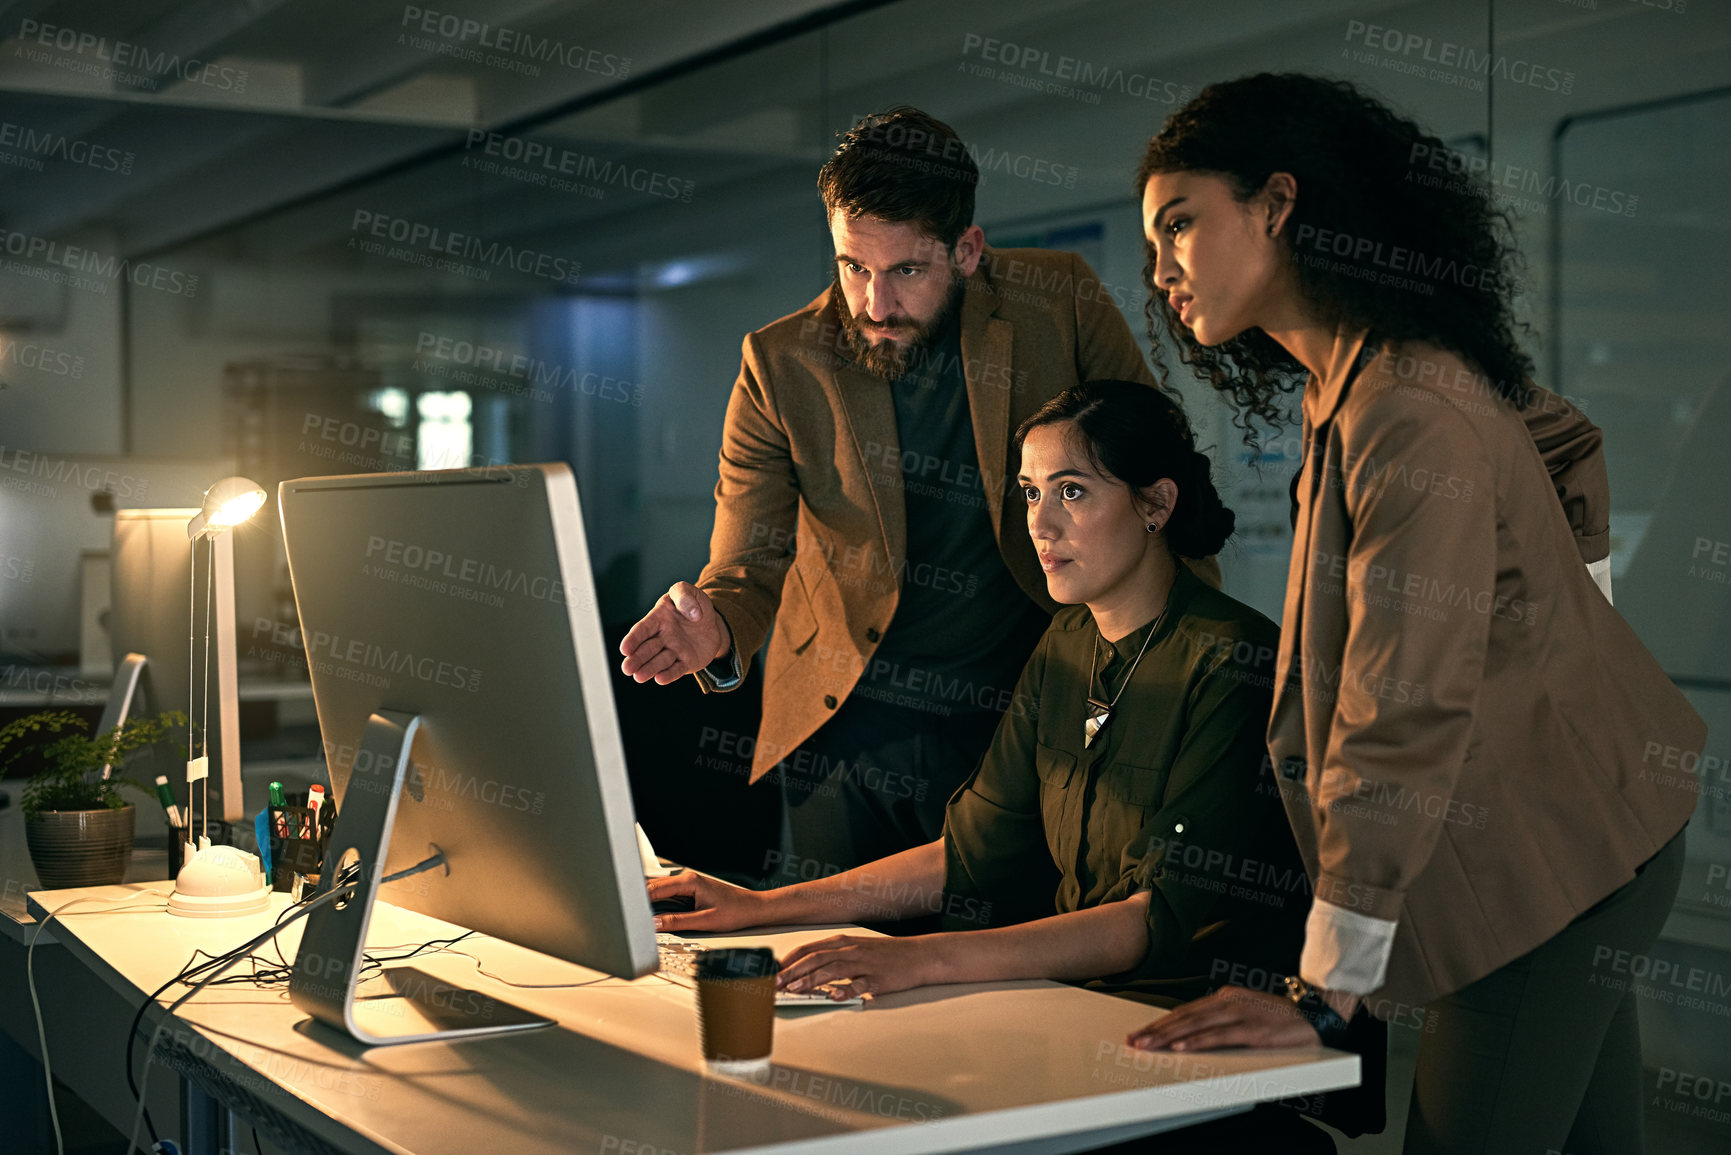 Buy stock photo Cropped shot of colleagues working late